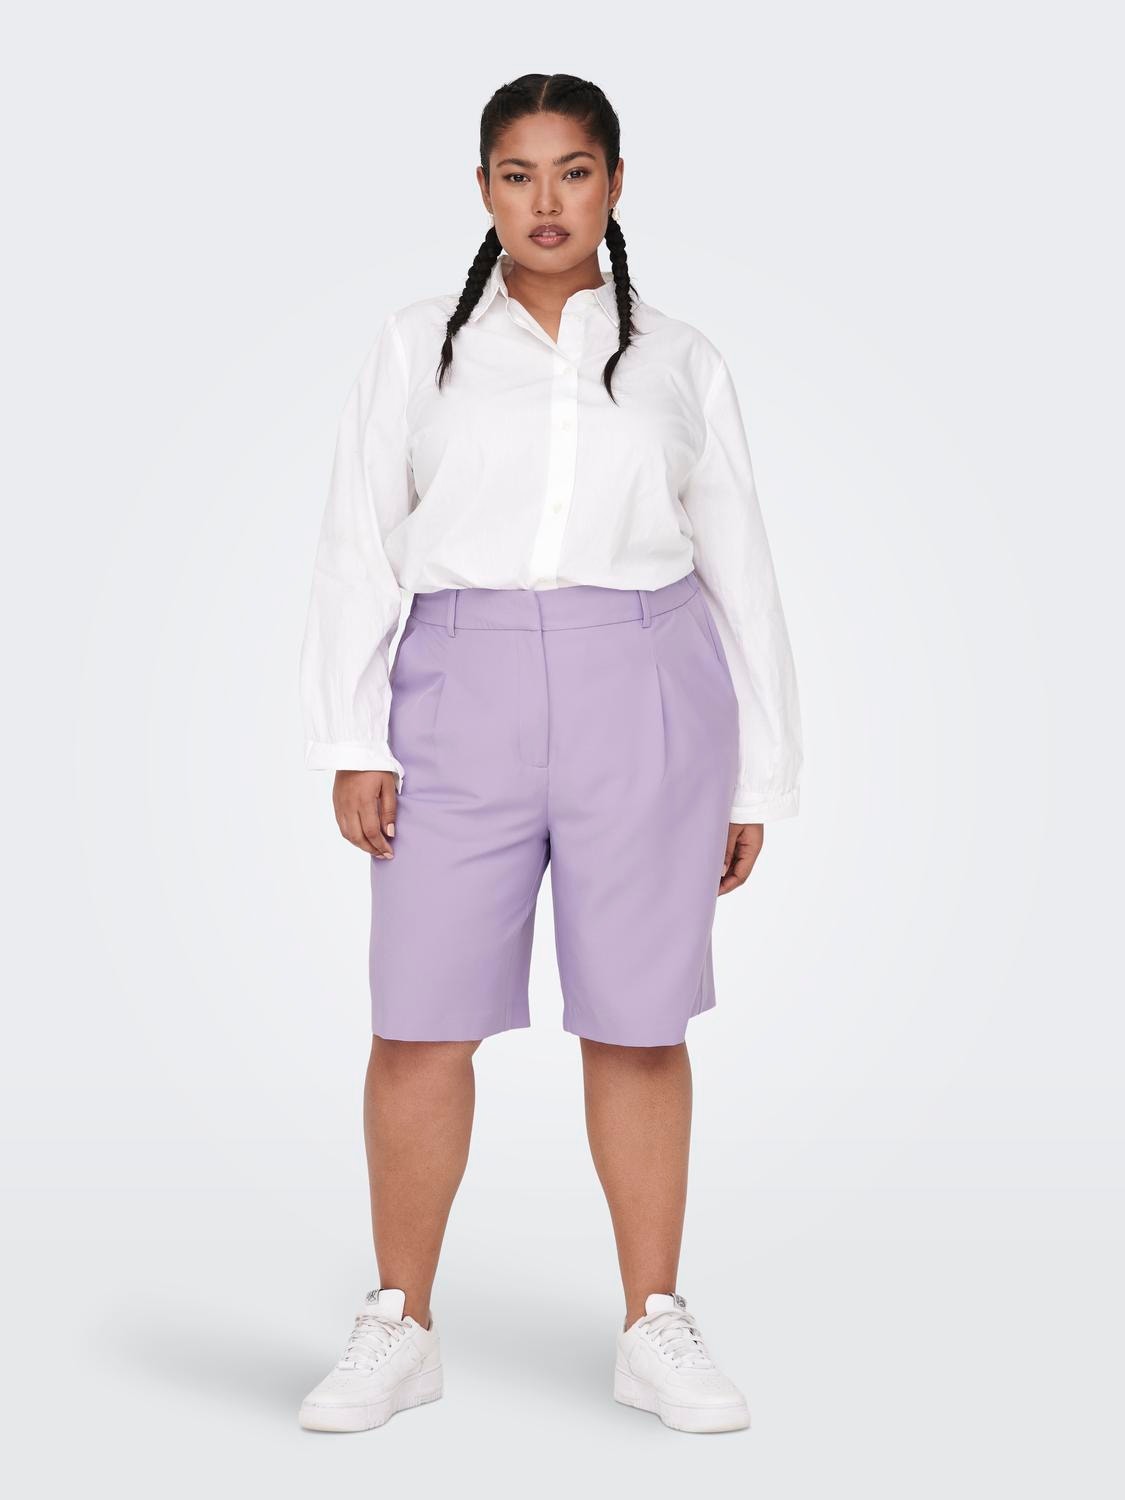 ONLY Curvy classic shorts -Purple Rose - 15289365